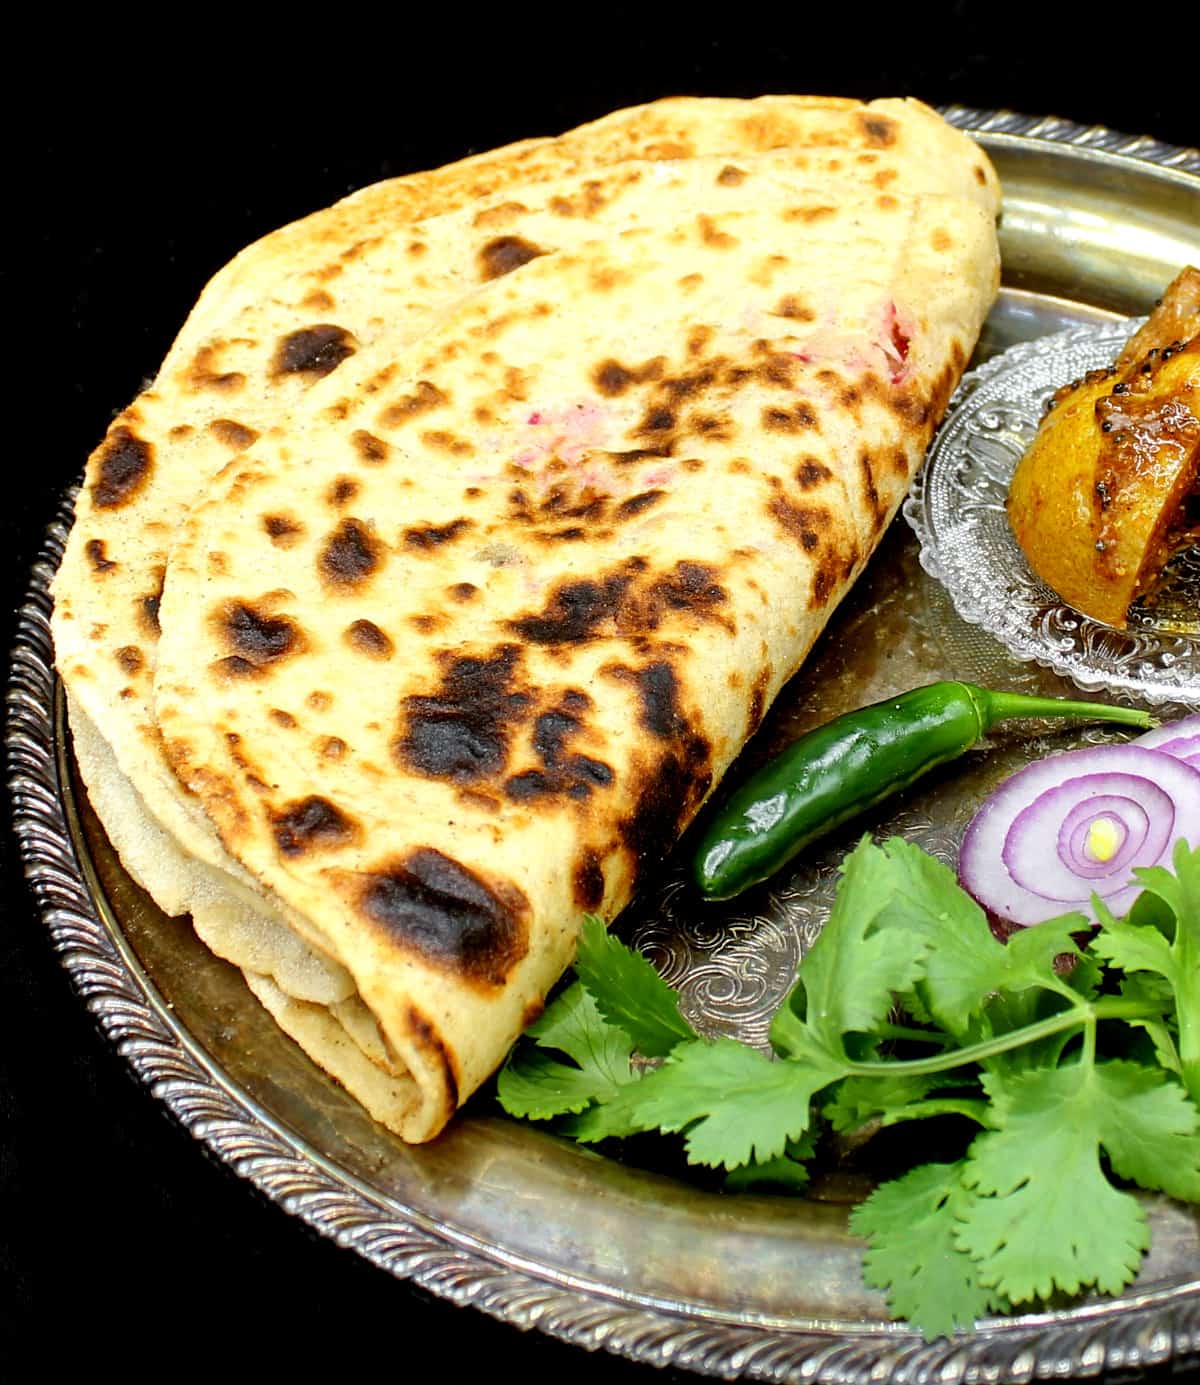 A silver decorative plate with three mooli parathas stuffed with radish and spices served alongside Indian pickles, green chili pepper, onions and cilantro